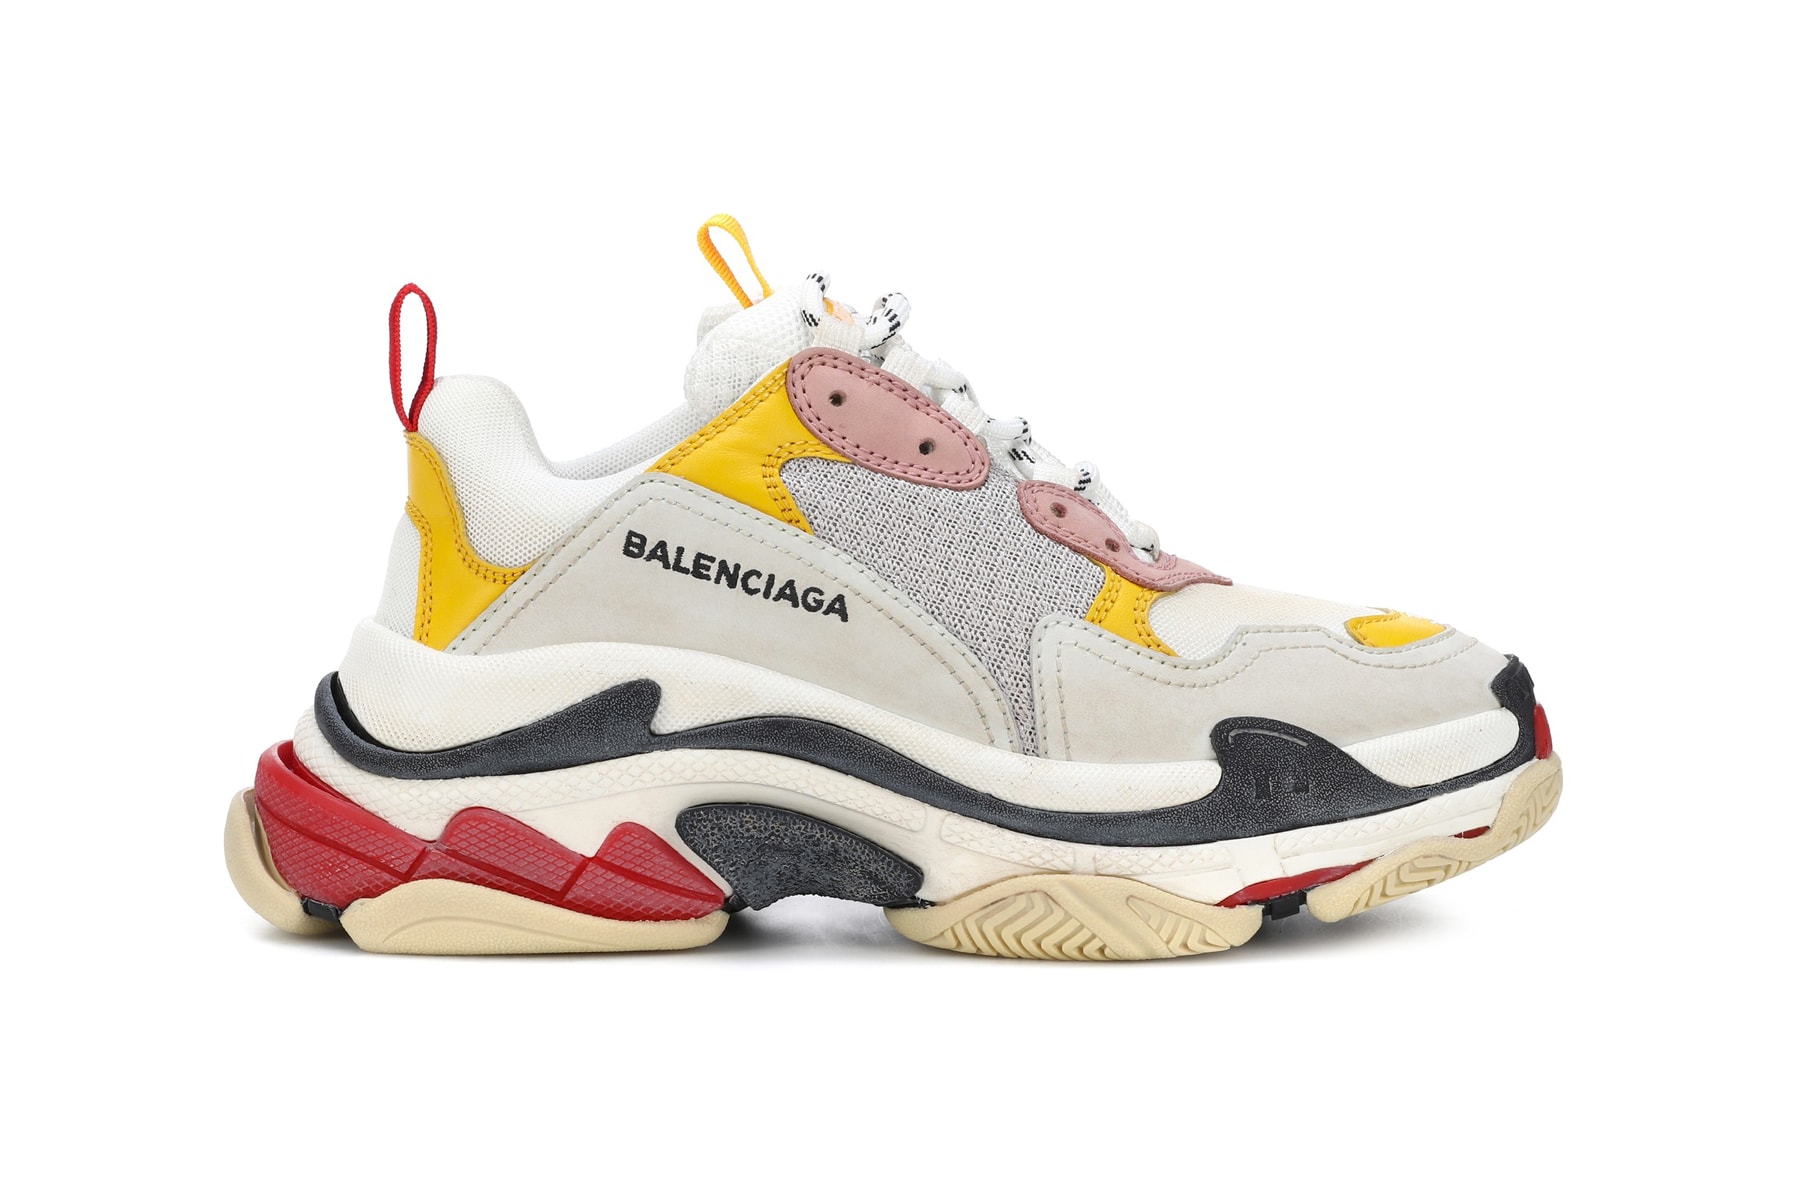 These Balenciaga Triple - S Shoes Have Restocked